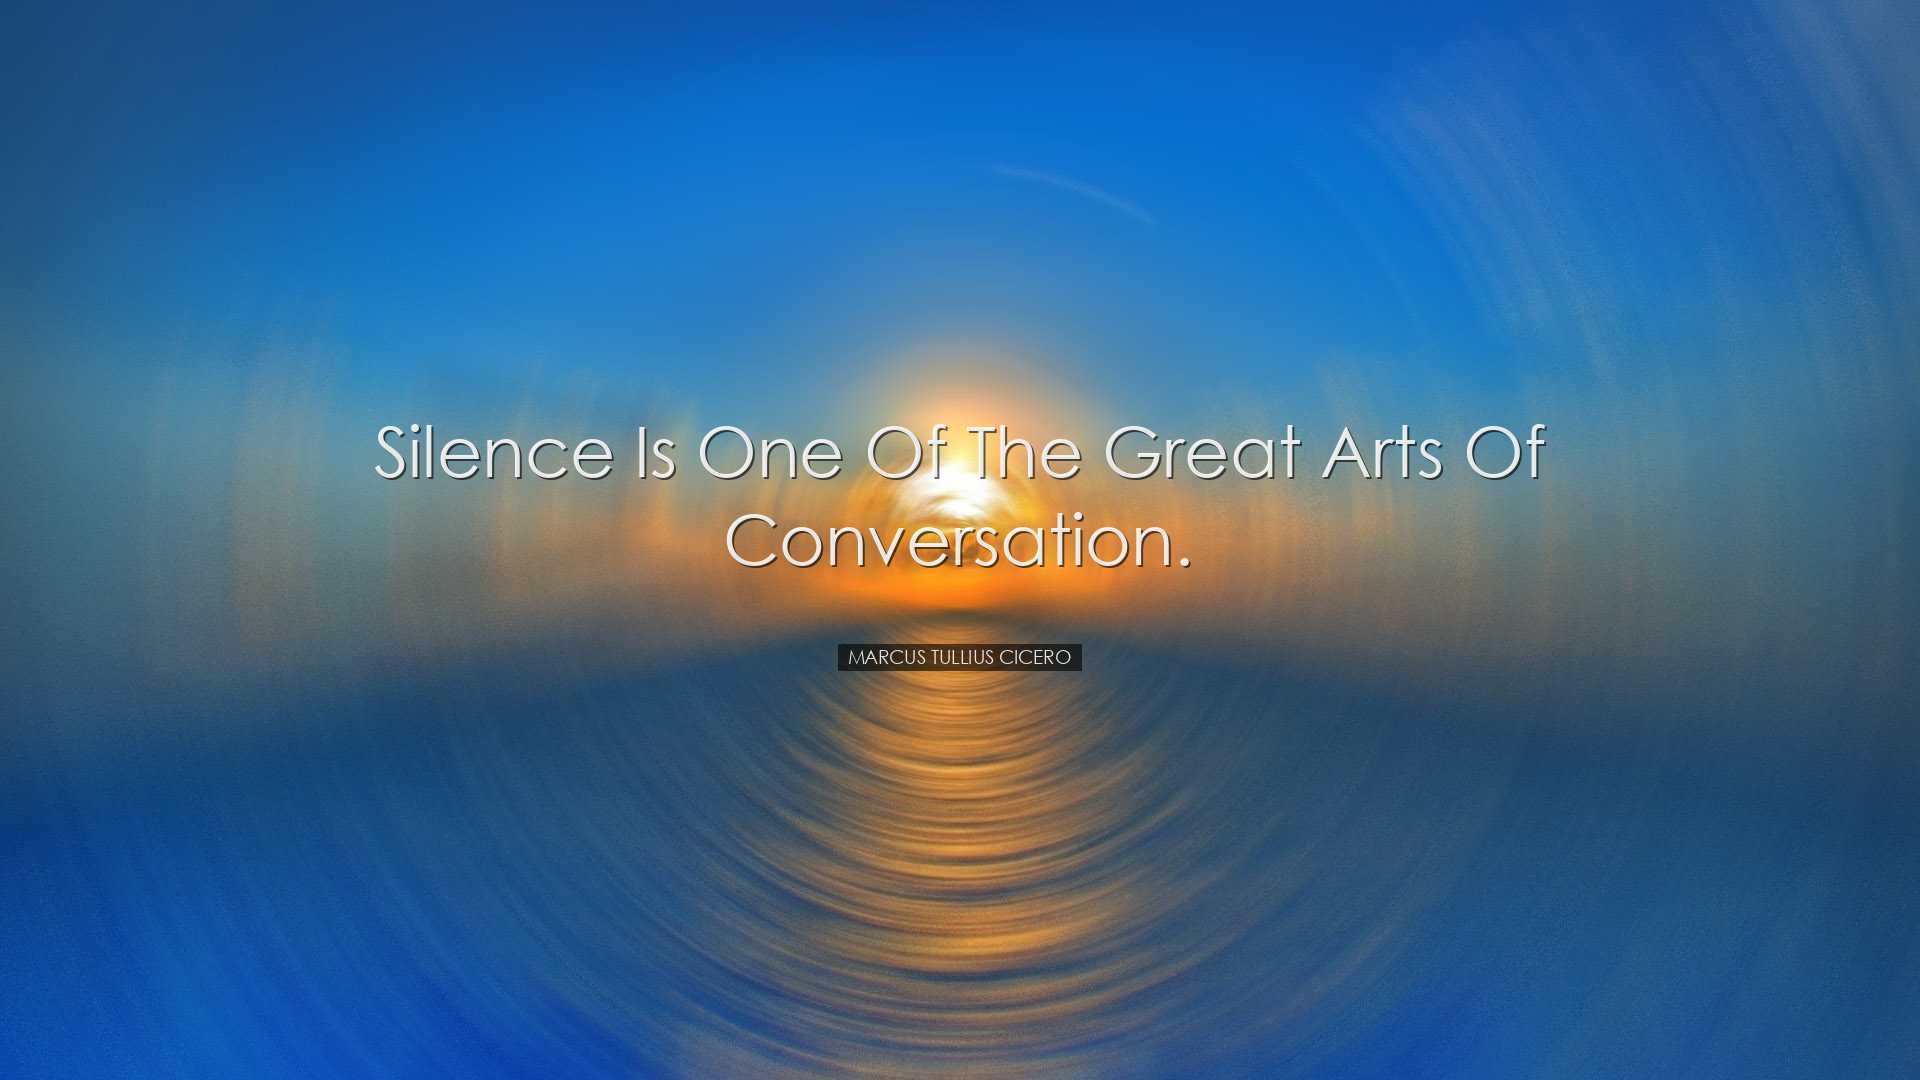 Silence is one of the great arts of conversation. - Marcus Tullius